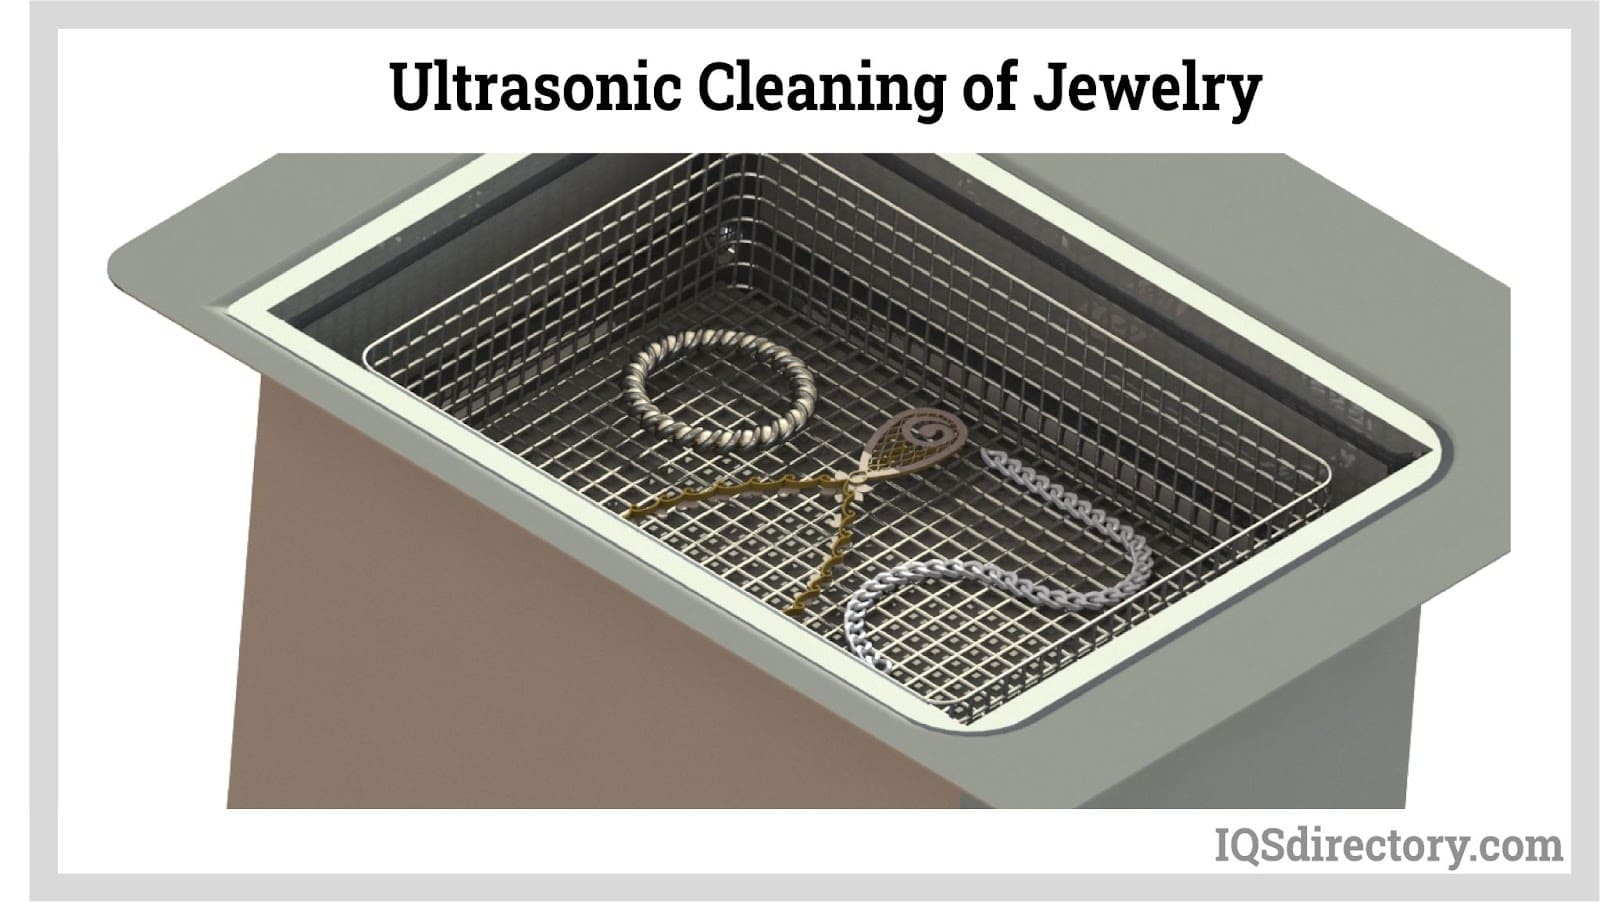 Ultrasonic Cleaning of Jewelry